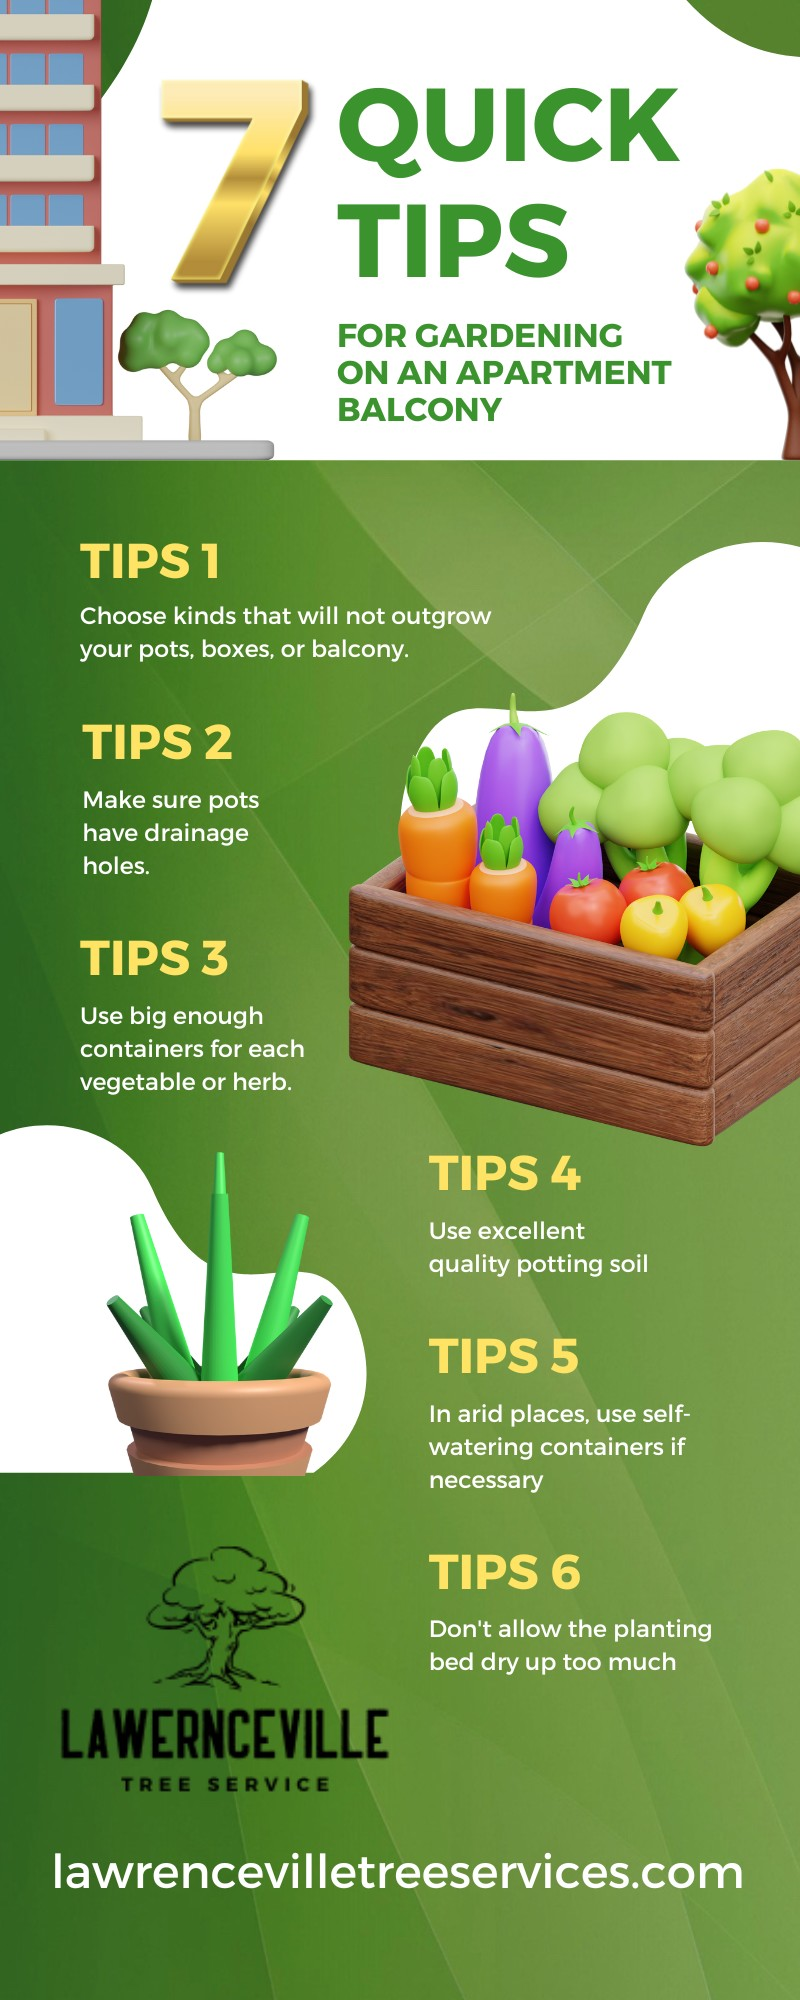 7 Quick Tips for Gardening on an Apartment Balcony [Infographic]